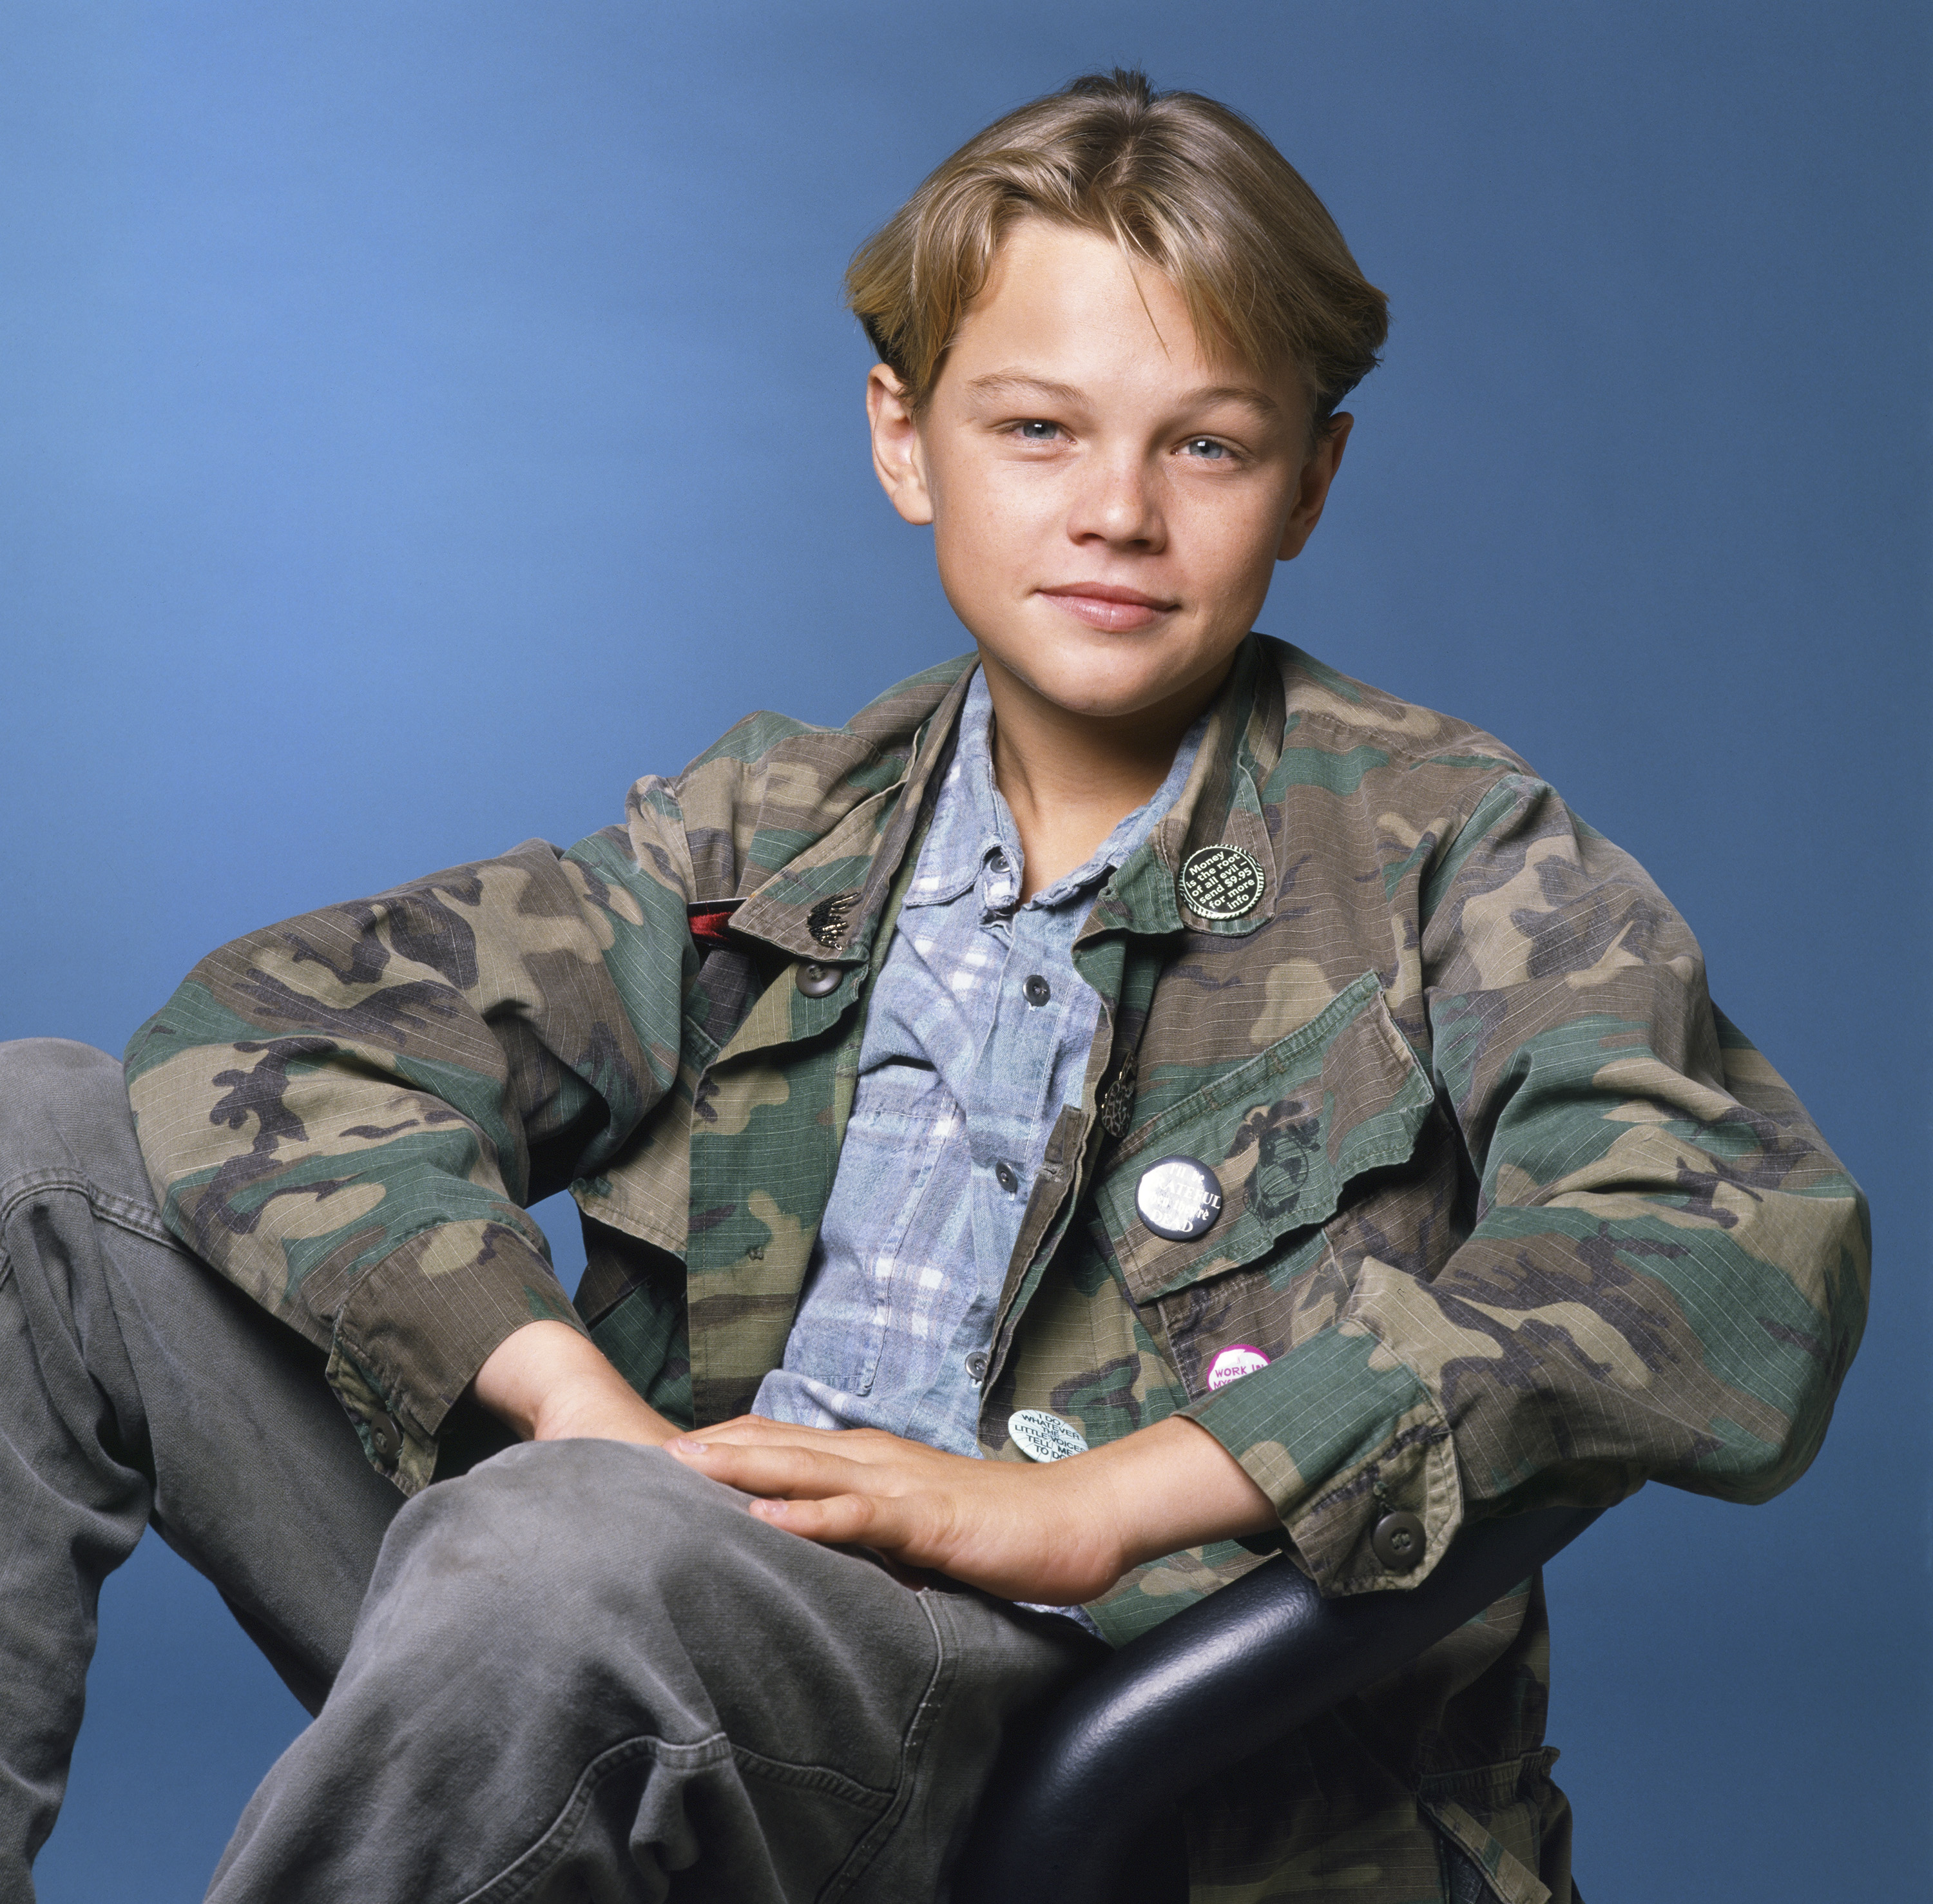 Leornado DiCaprio in 1990 | Source: Getty Images